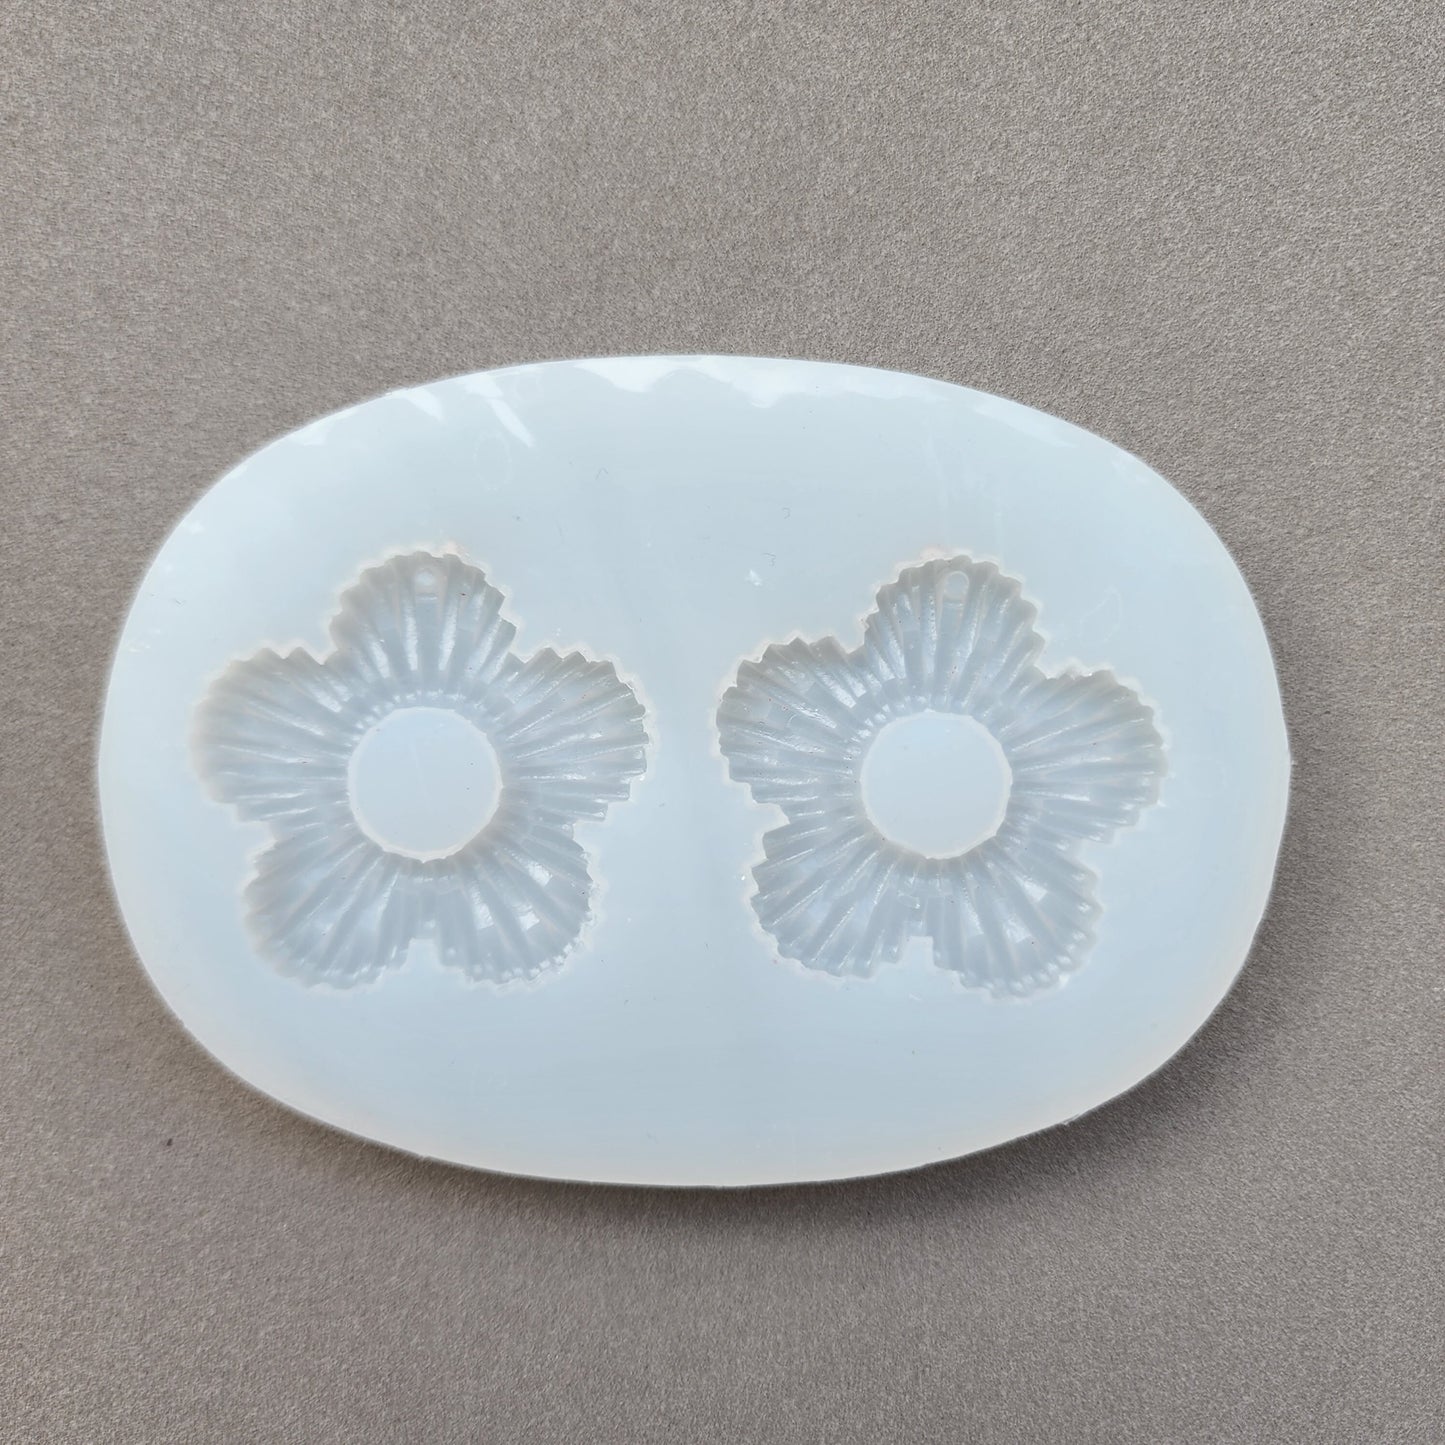 Silicone earrings mold / Silicone epoxy mold / Silicone UV resin molds / Rattan flower earrings silicone jewelry mold